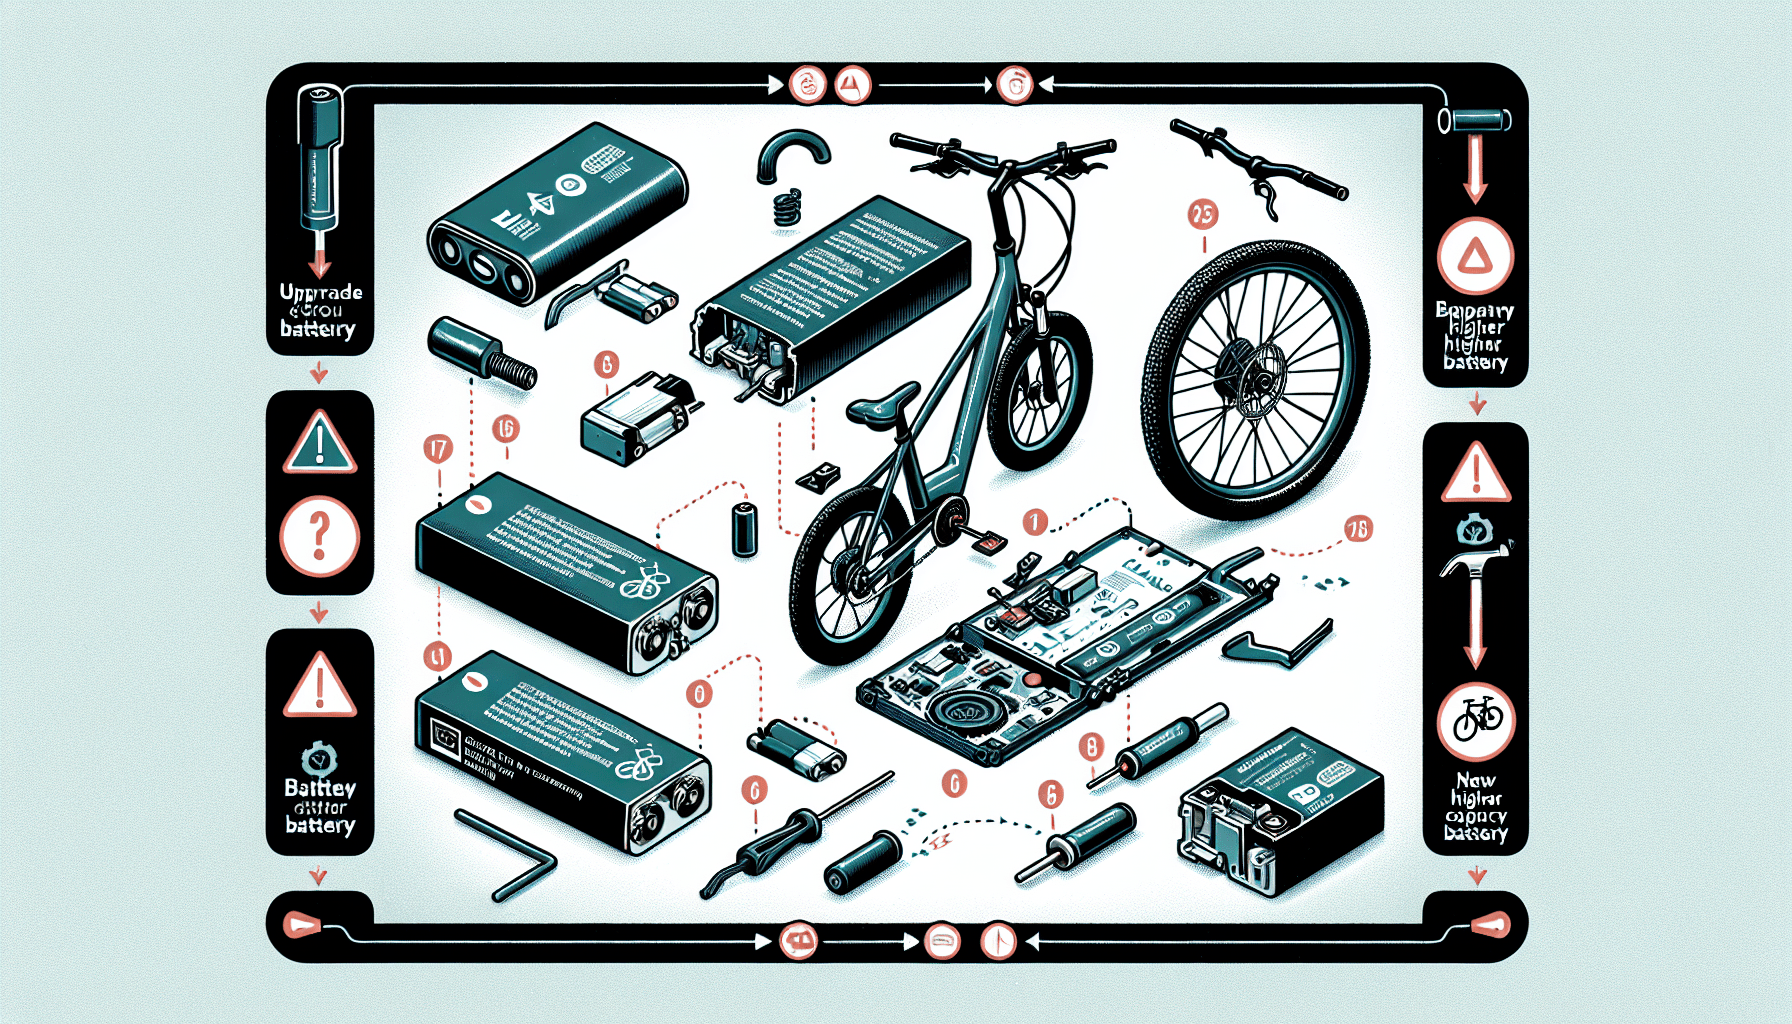 Can You Upgrade The Battery On An Electric Bike?